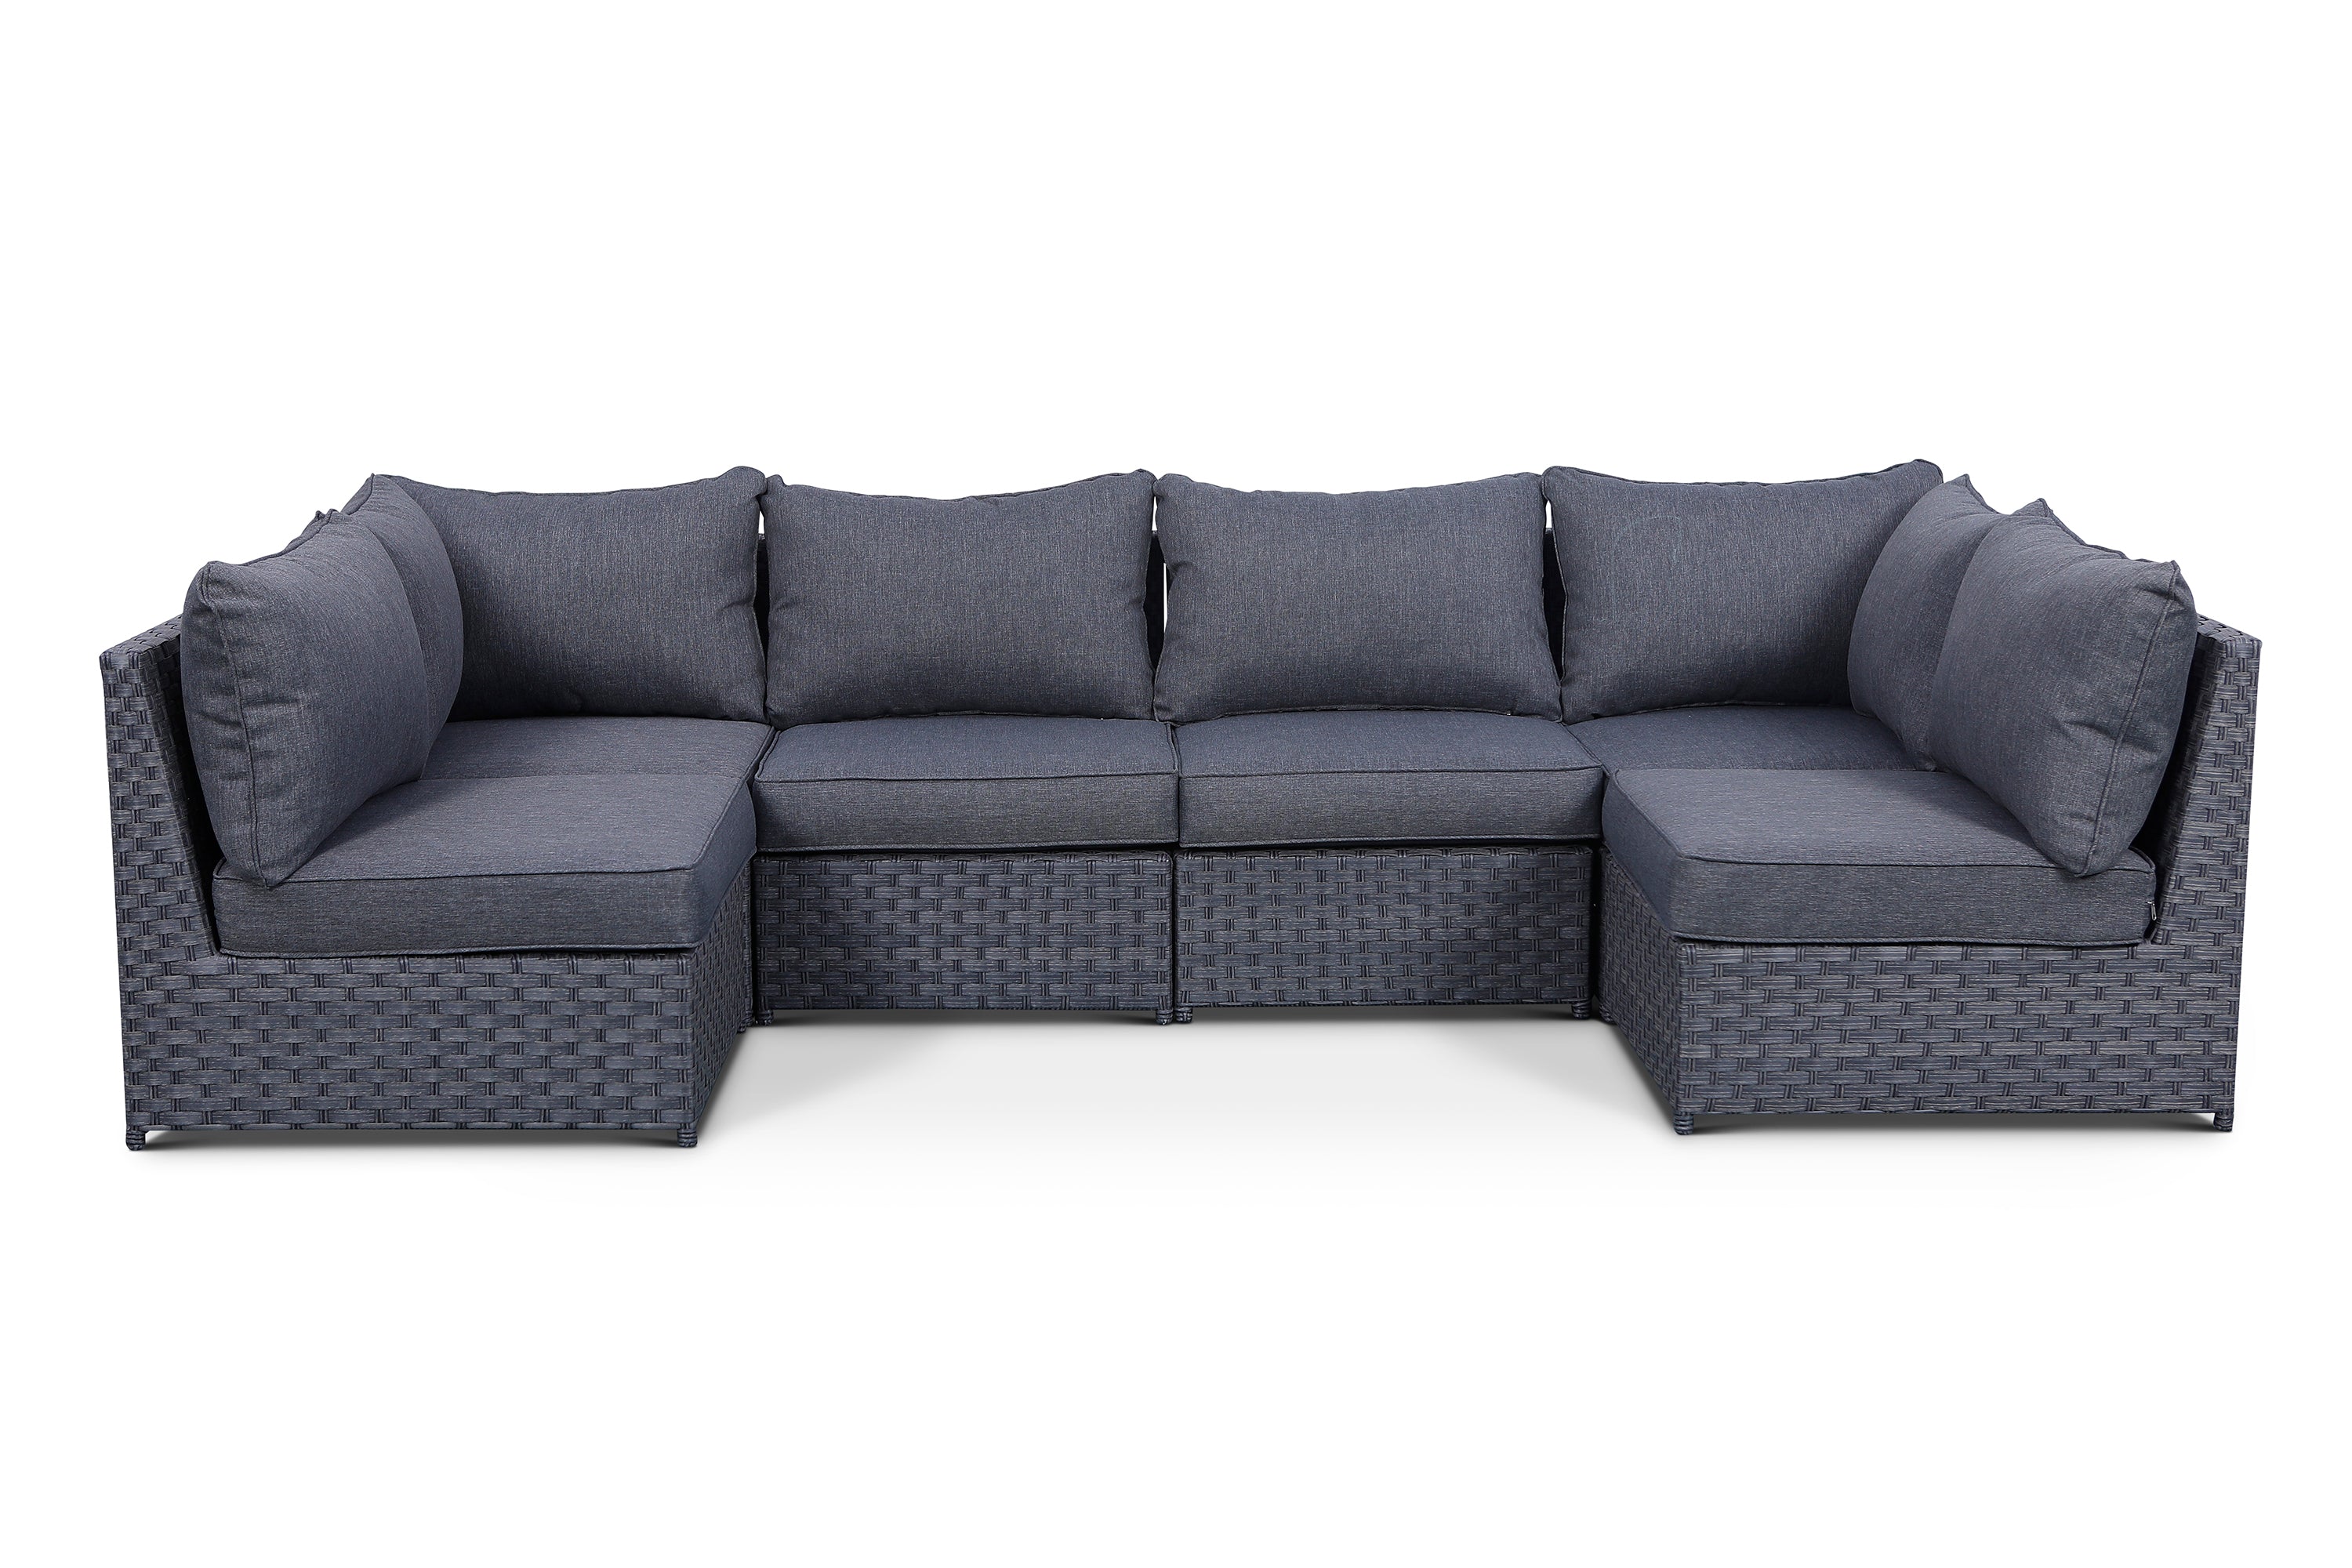 Cromwell 6 Piece Armless Sectional